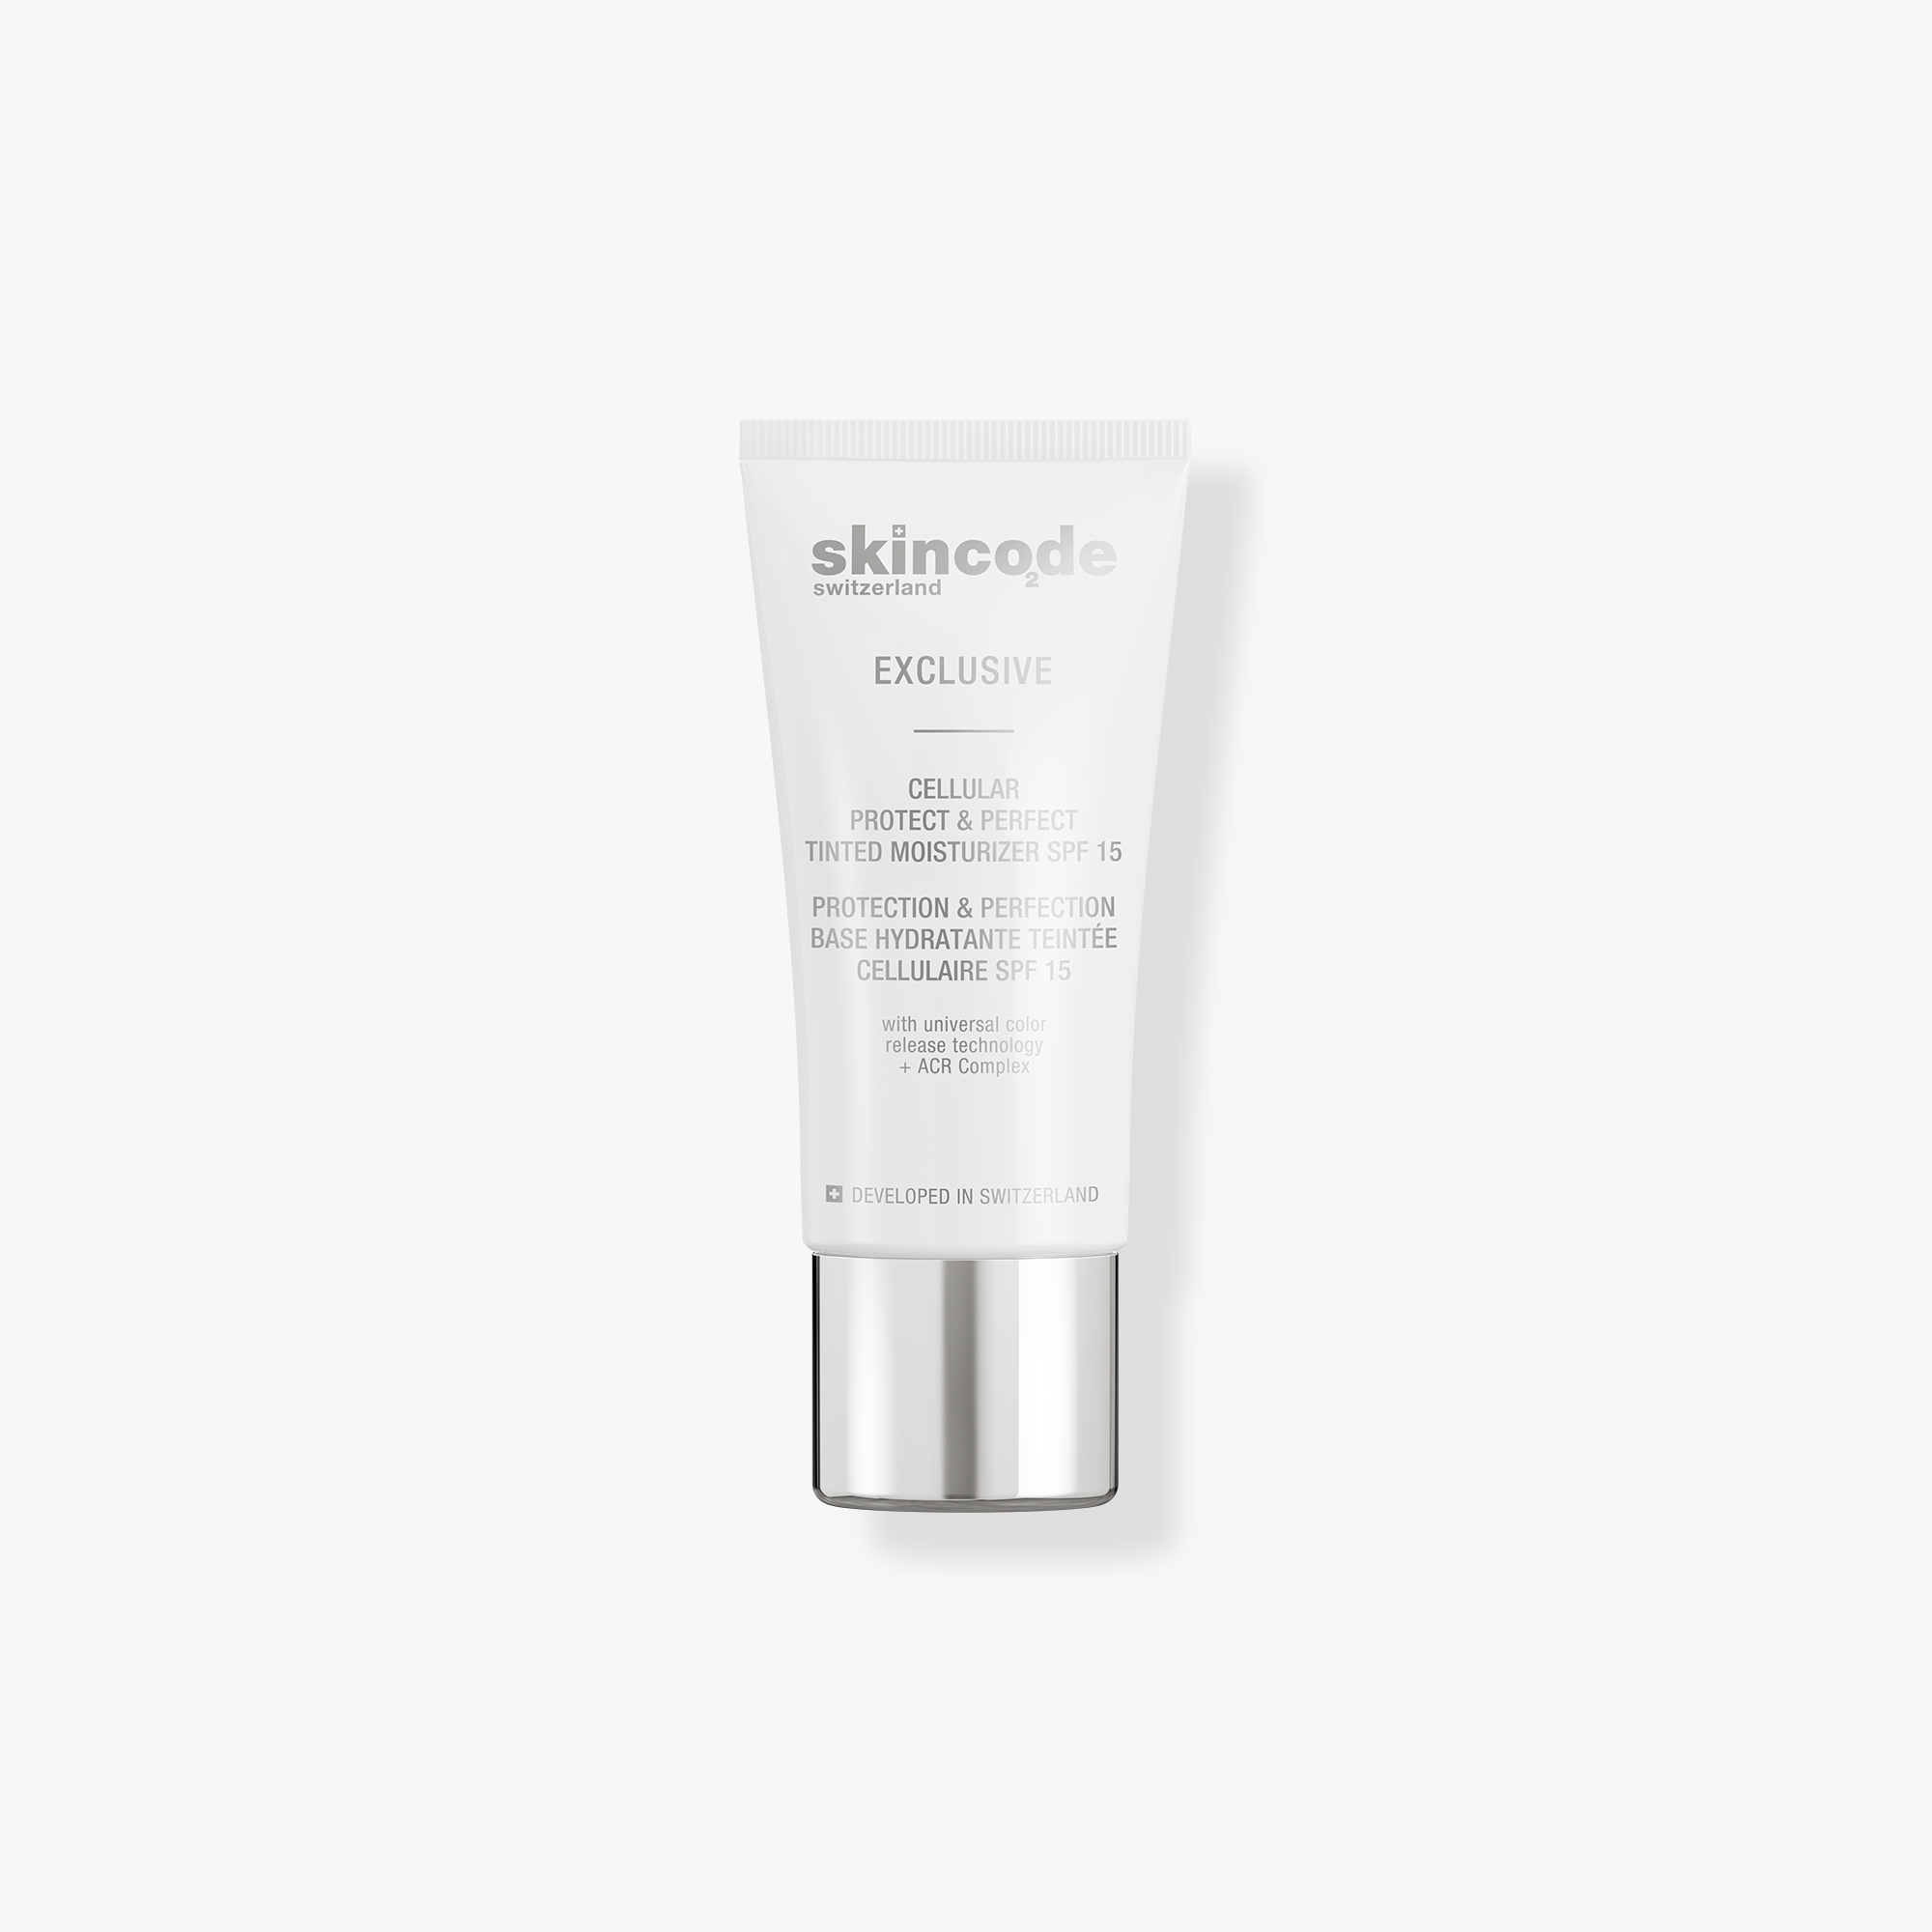 Skincode Exclusive Cellular Protect&Perfect Tinted Moisturizer Spf15, 30ml